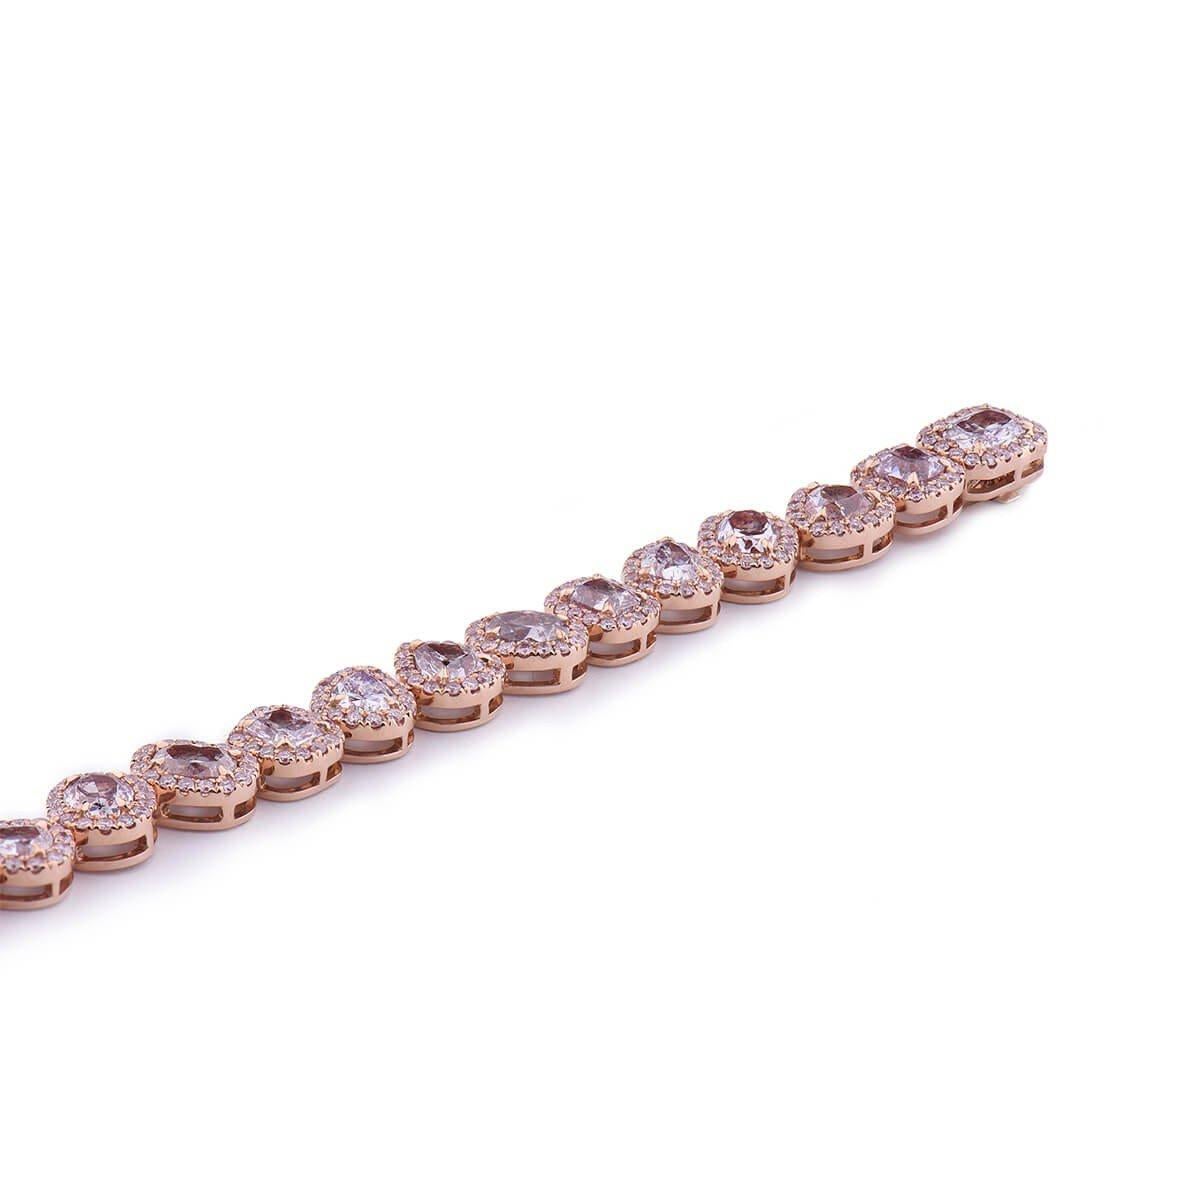 MIXED CUT FANCY PINK DIAMOND BRACELET - 7.33 CT


Set in 18KT Pink gold


Total diamond weight: 7.33 ct
[ 457 diamonds ]
Color: Very light pink - Faint Pink - Brownish / Purplish Pink - Fancy Pink - Orangy pink
Clarity: SI1-I1

All 27 diamonds are